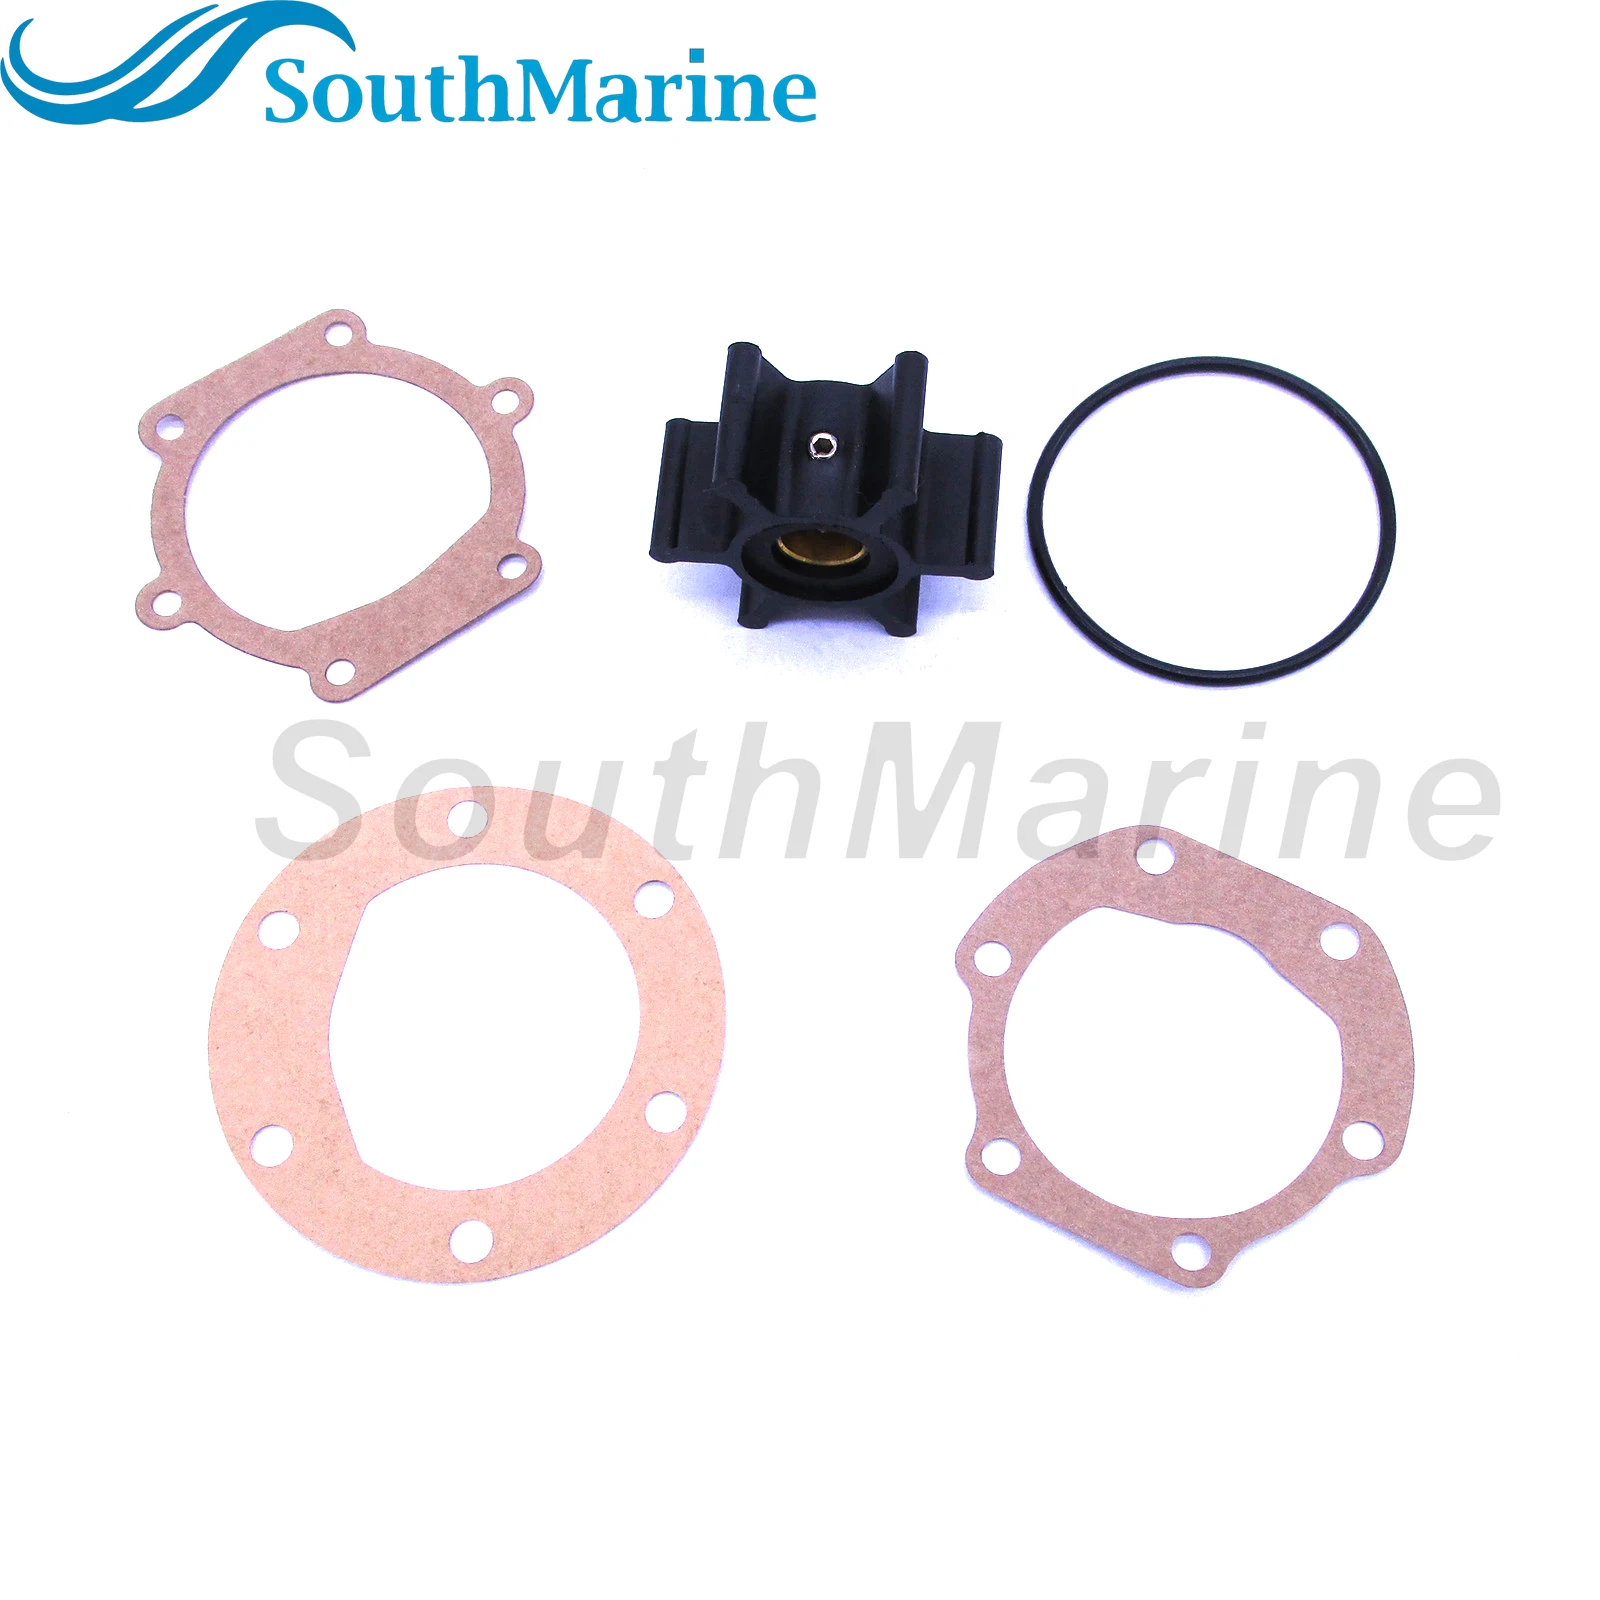 

09-810B 18653-0001 18653-0001-P 653-0001 128990-42200 9-45713 18-45713 Water Pump Impeller with Gasket & O-Ring for Jabsco / Joh